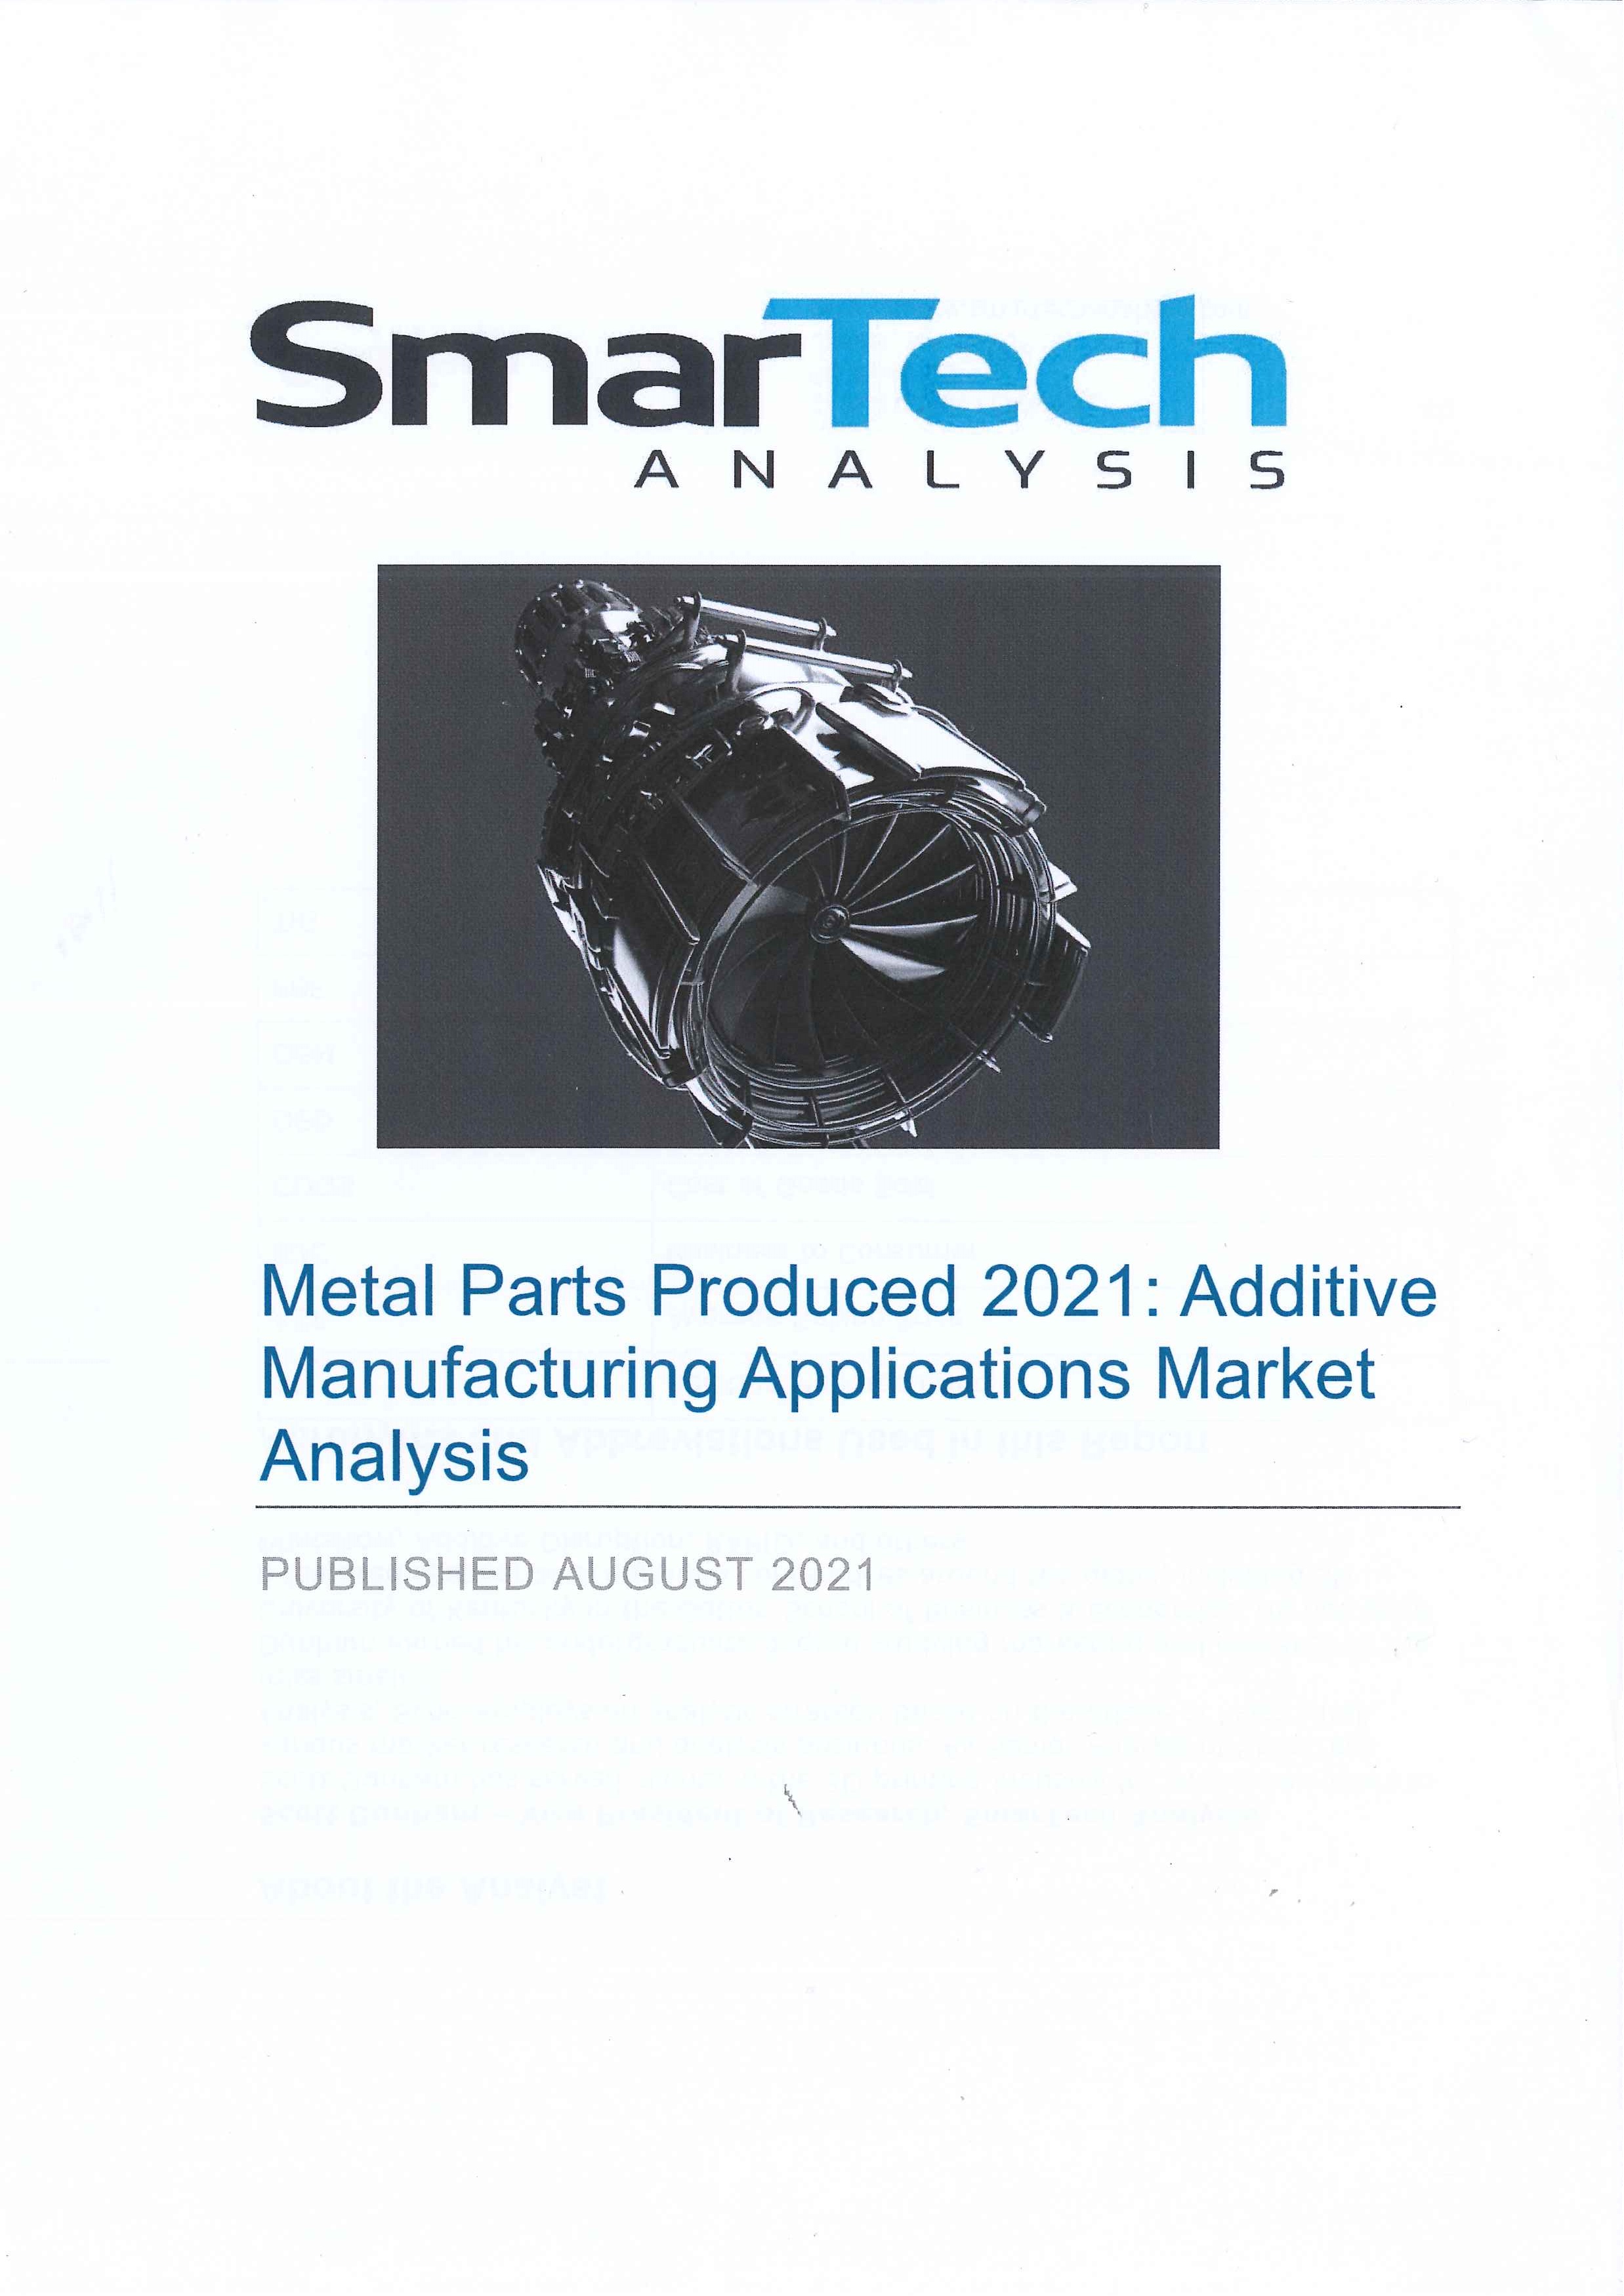 Metal parts produced 2021 [e-book]:additive manufacturing applications market analysis